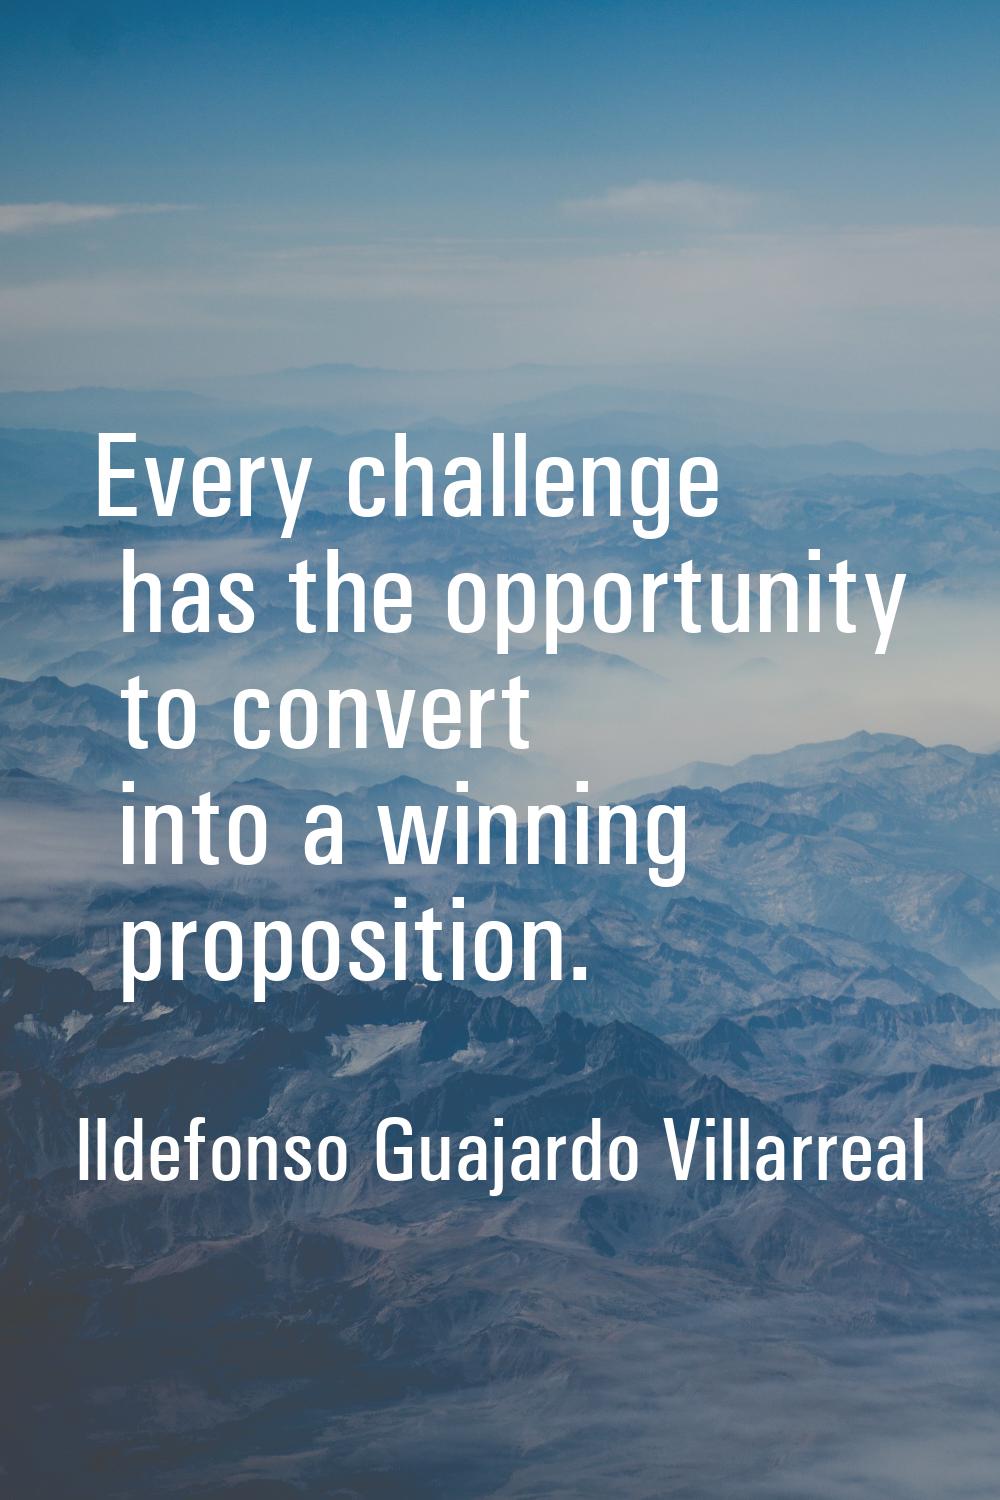 Every challenge has the opportunity to convert into a winning proposition.